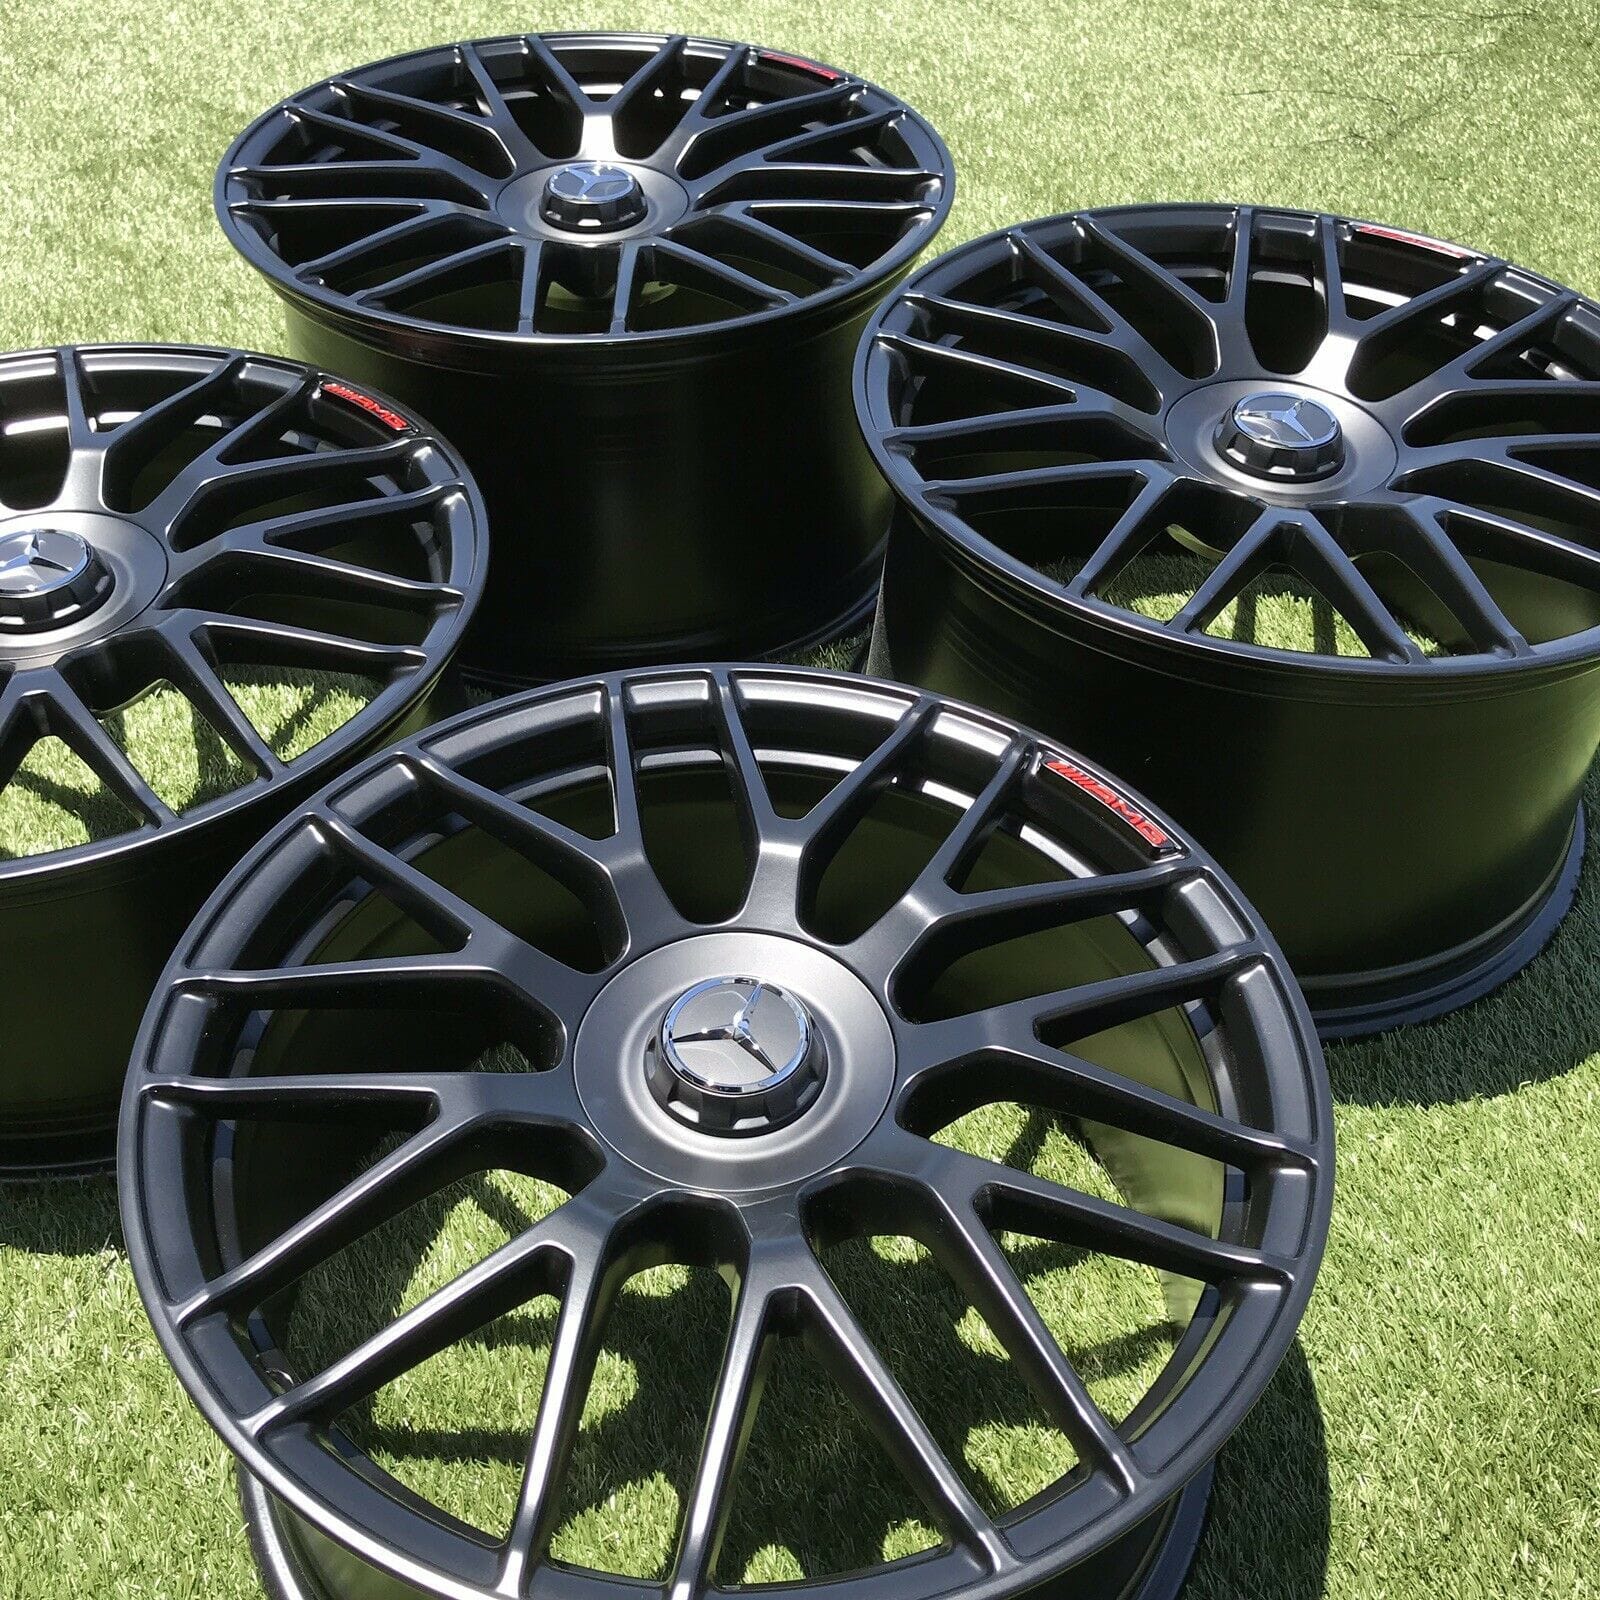 Wheels and Tires/Axles - 19" 20" Mercedes AMG Black Rims for GT-R GTS GT GTC w/ Red AMG Lettering - New - Corona, CA 92882, United States